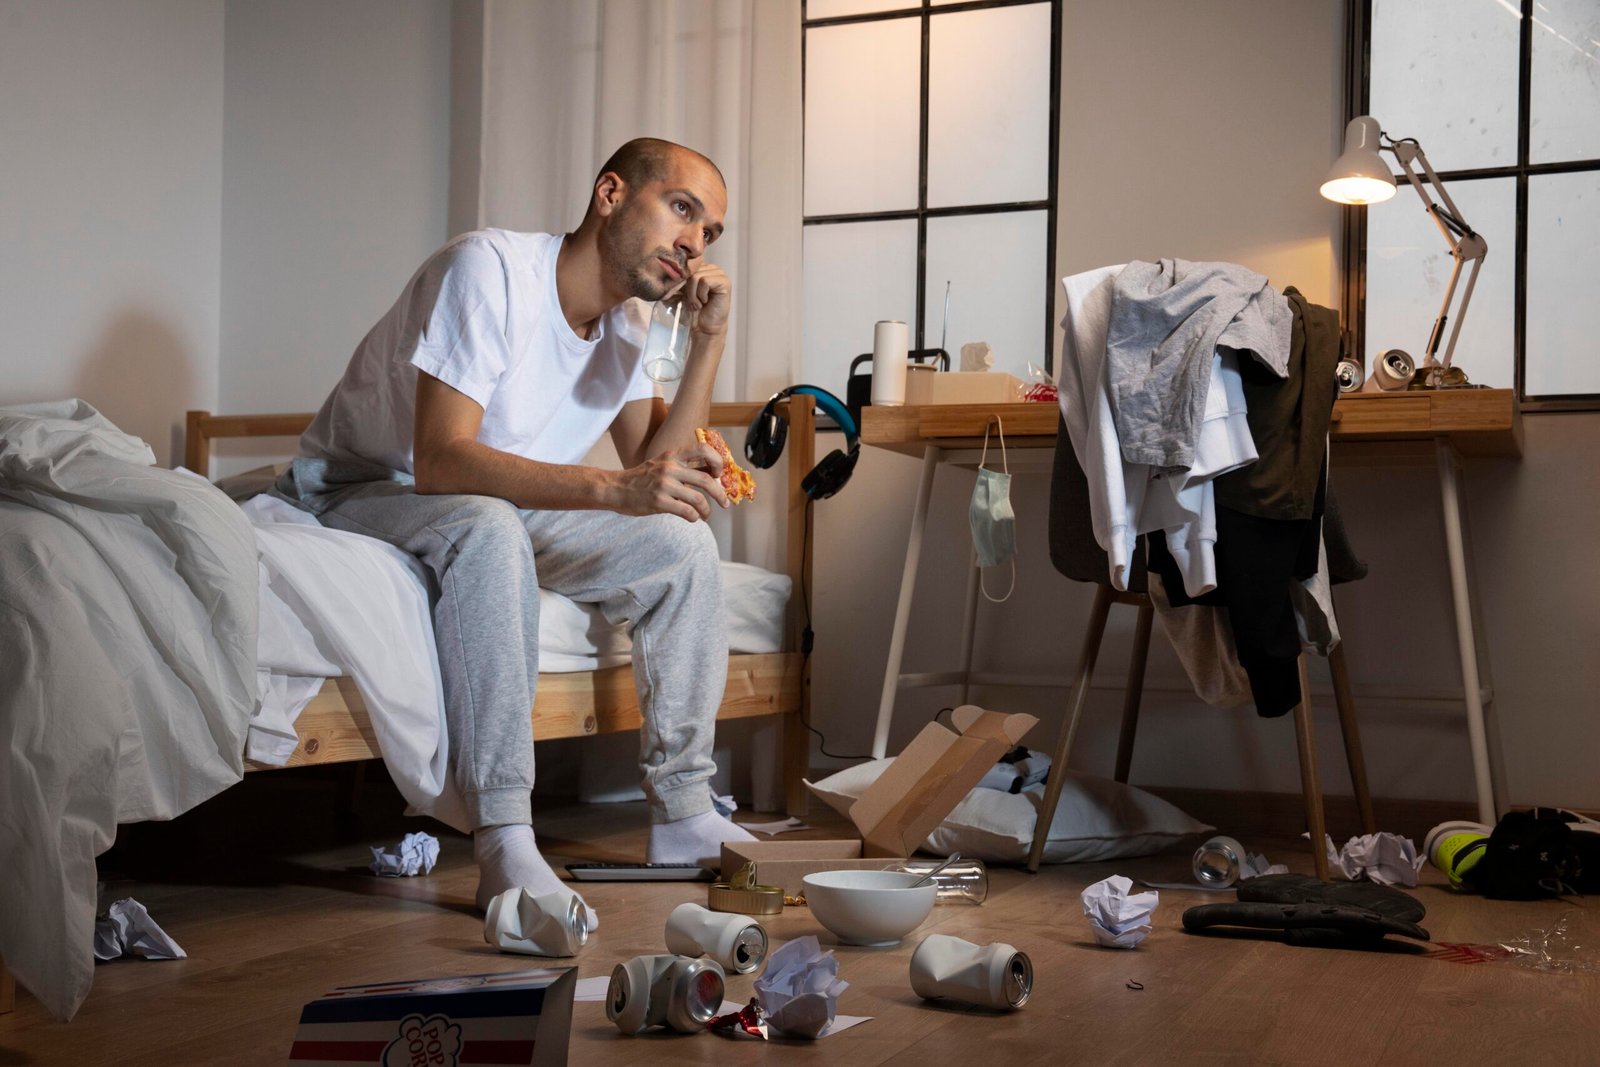 Man stressed about messy home.